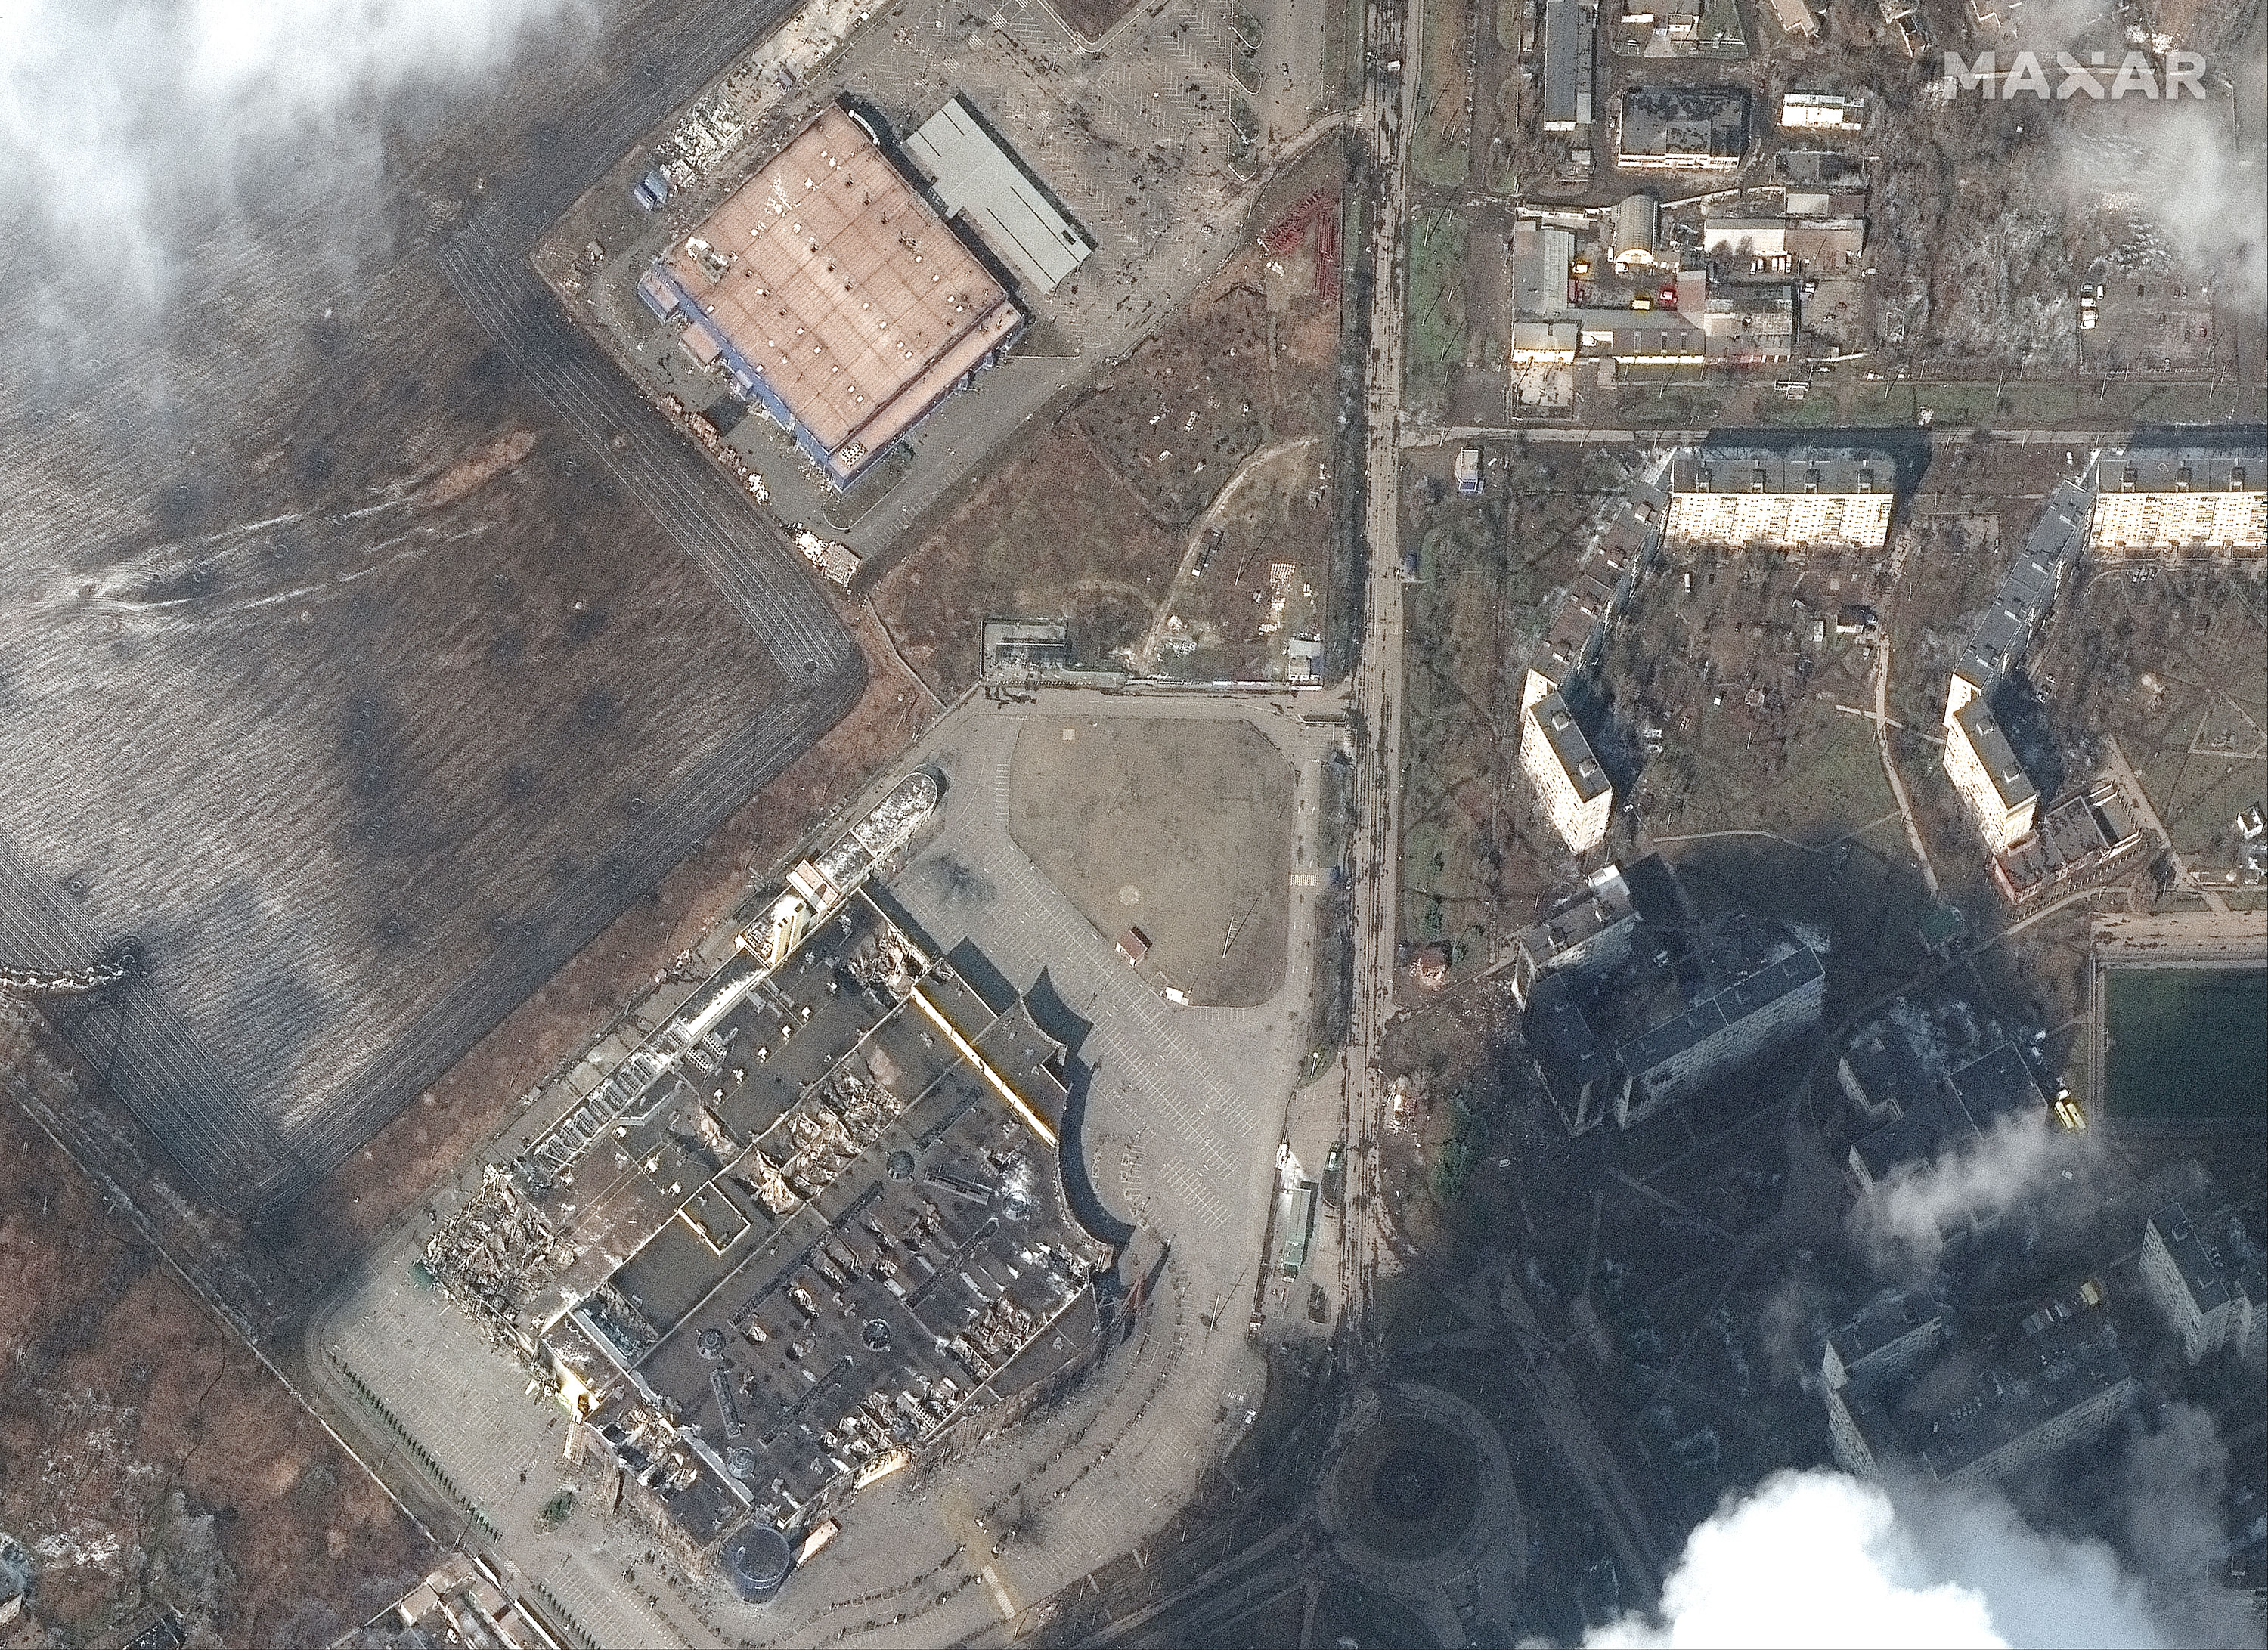 Portcity Shopping Mall and other buildings are seen damaged and destroyed in this image taken March 9, 2022.